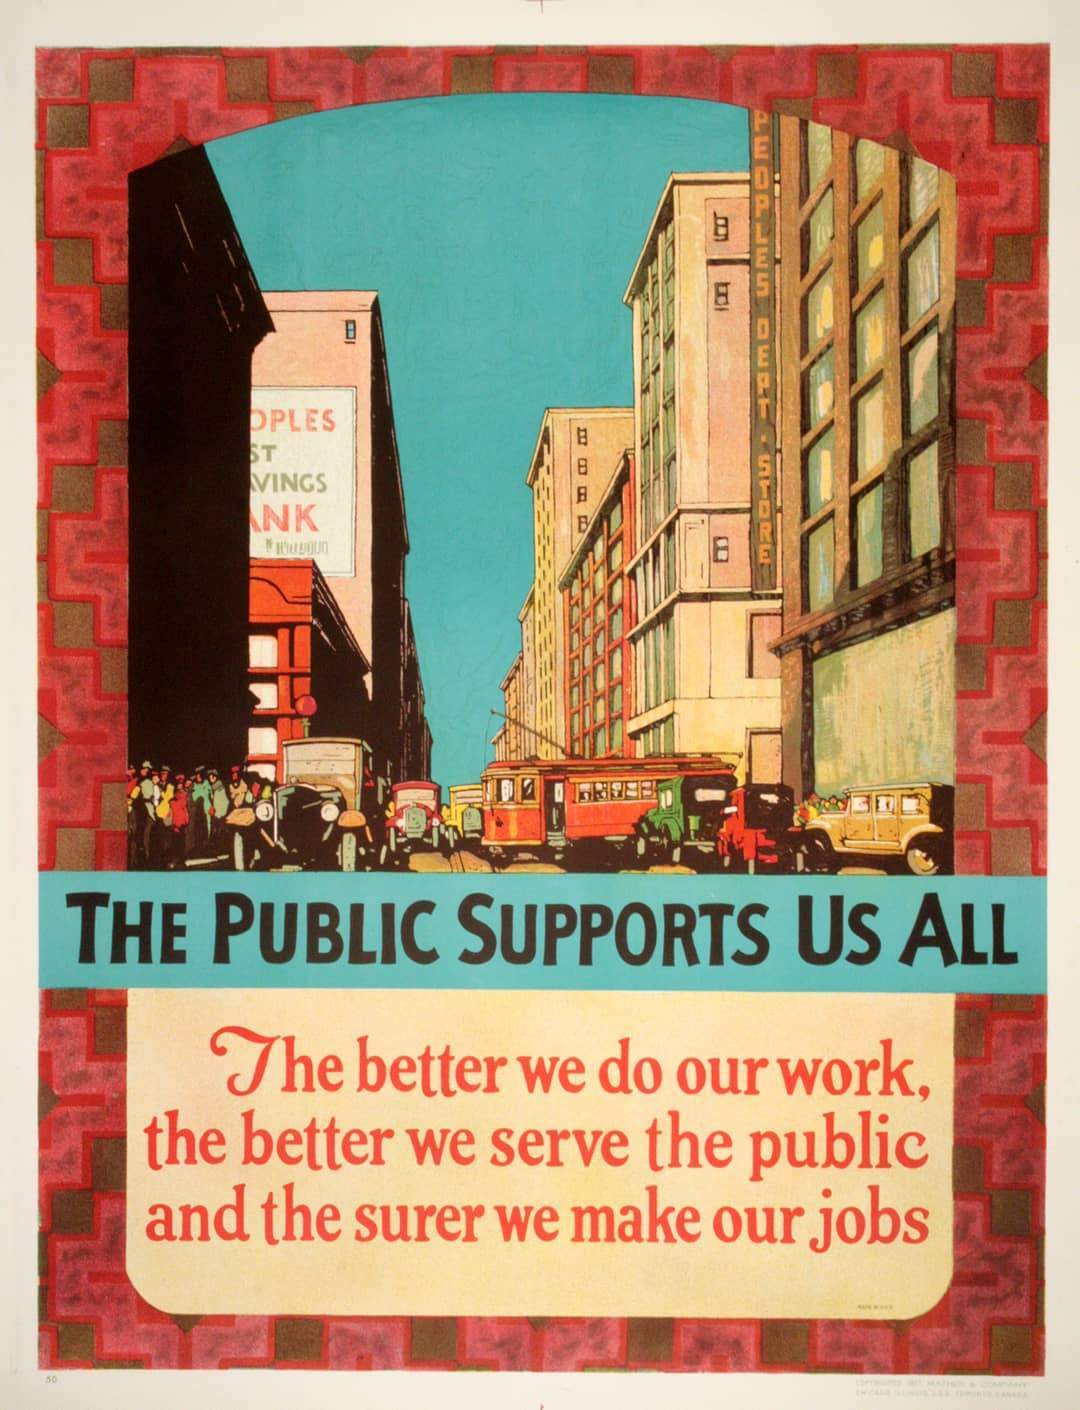 Original Mather Work Incentive Poster 1927 - The Public Supports Us All